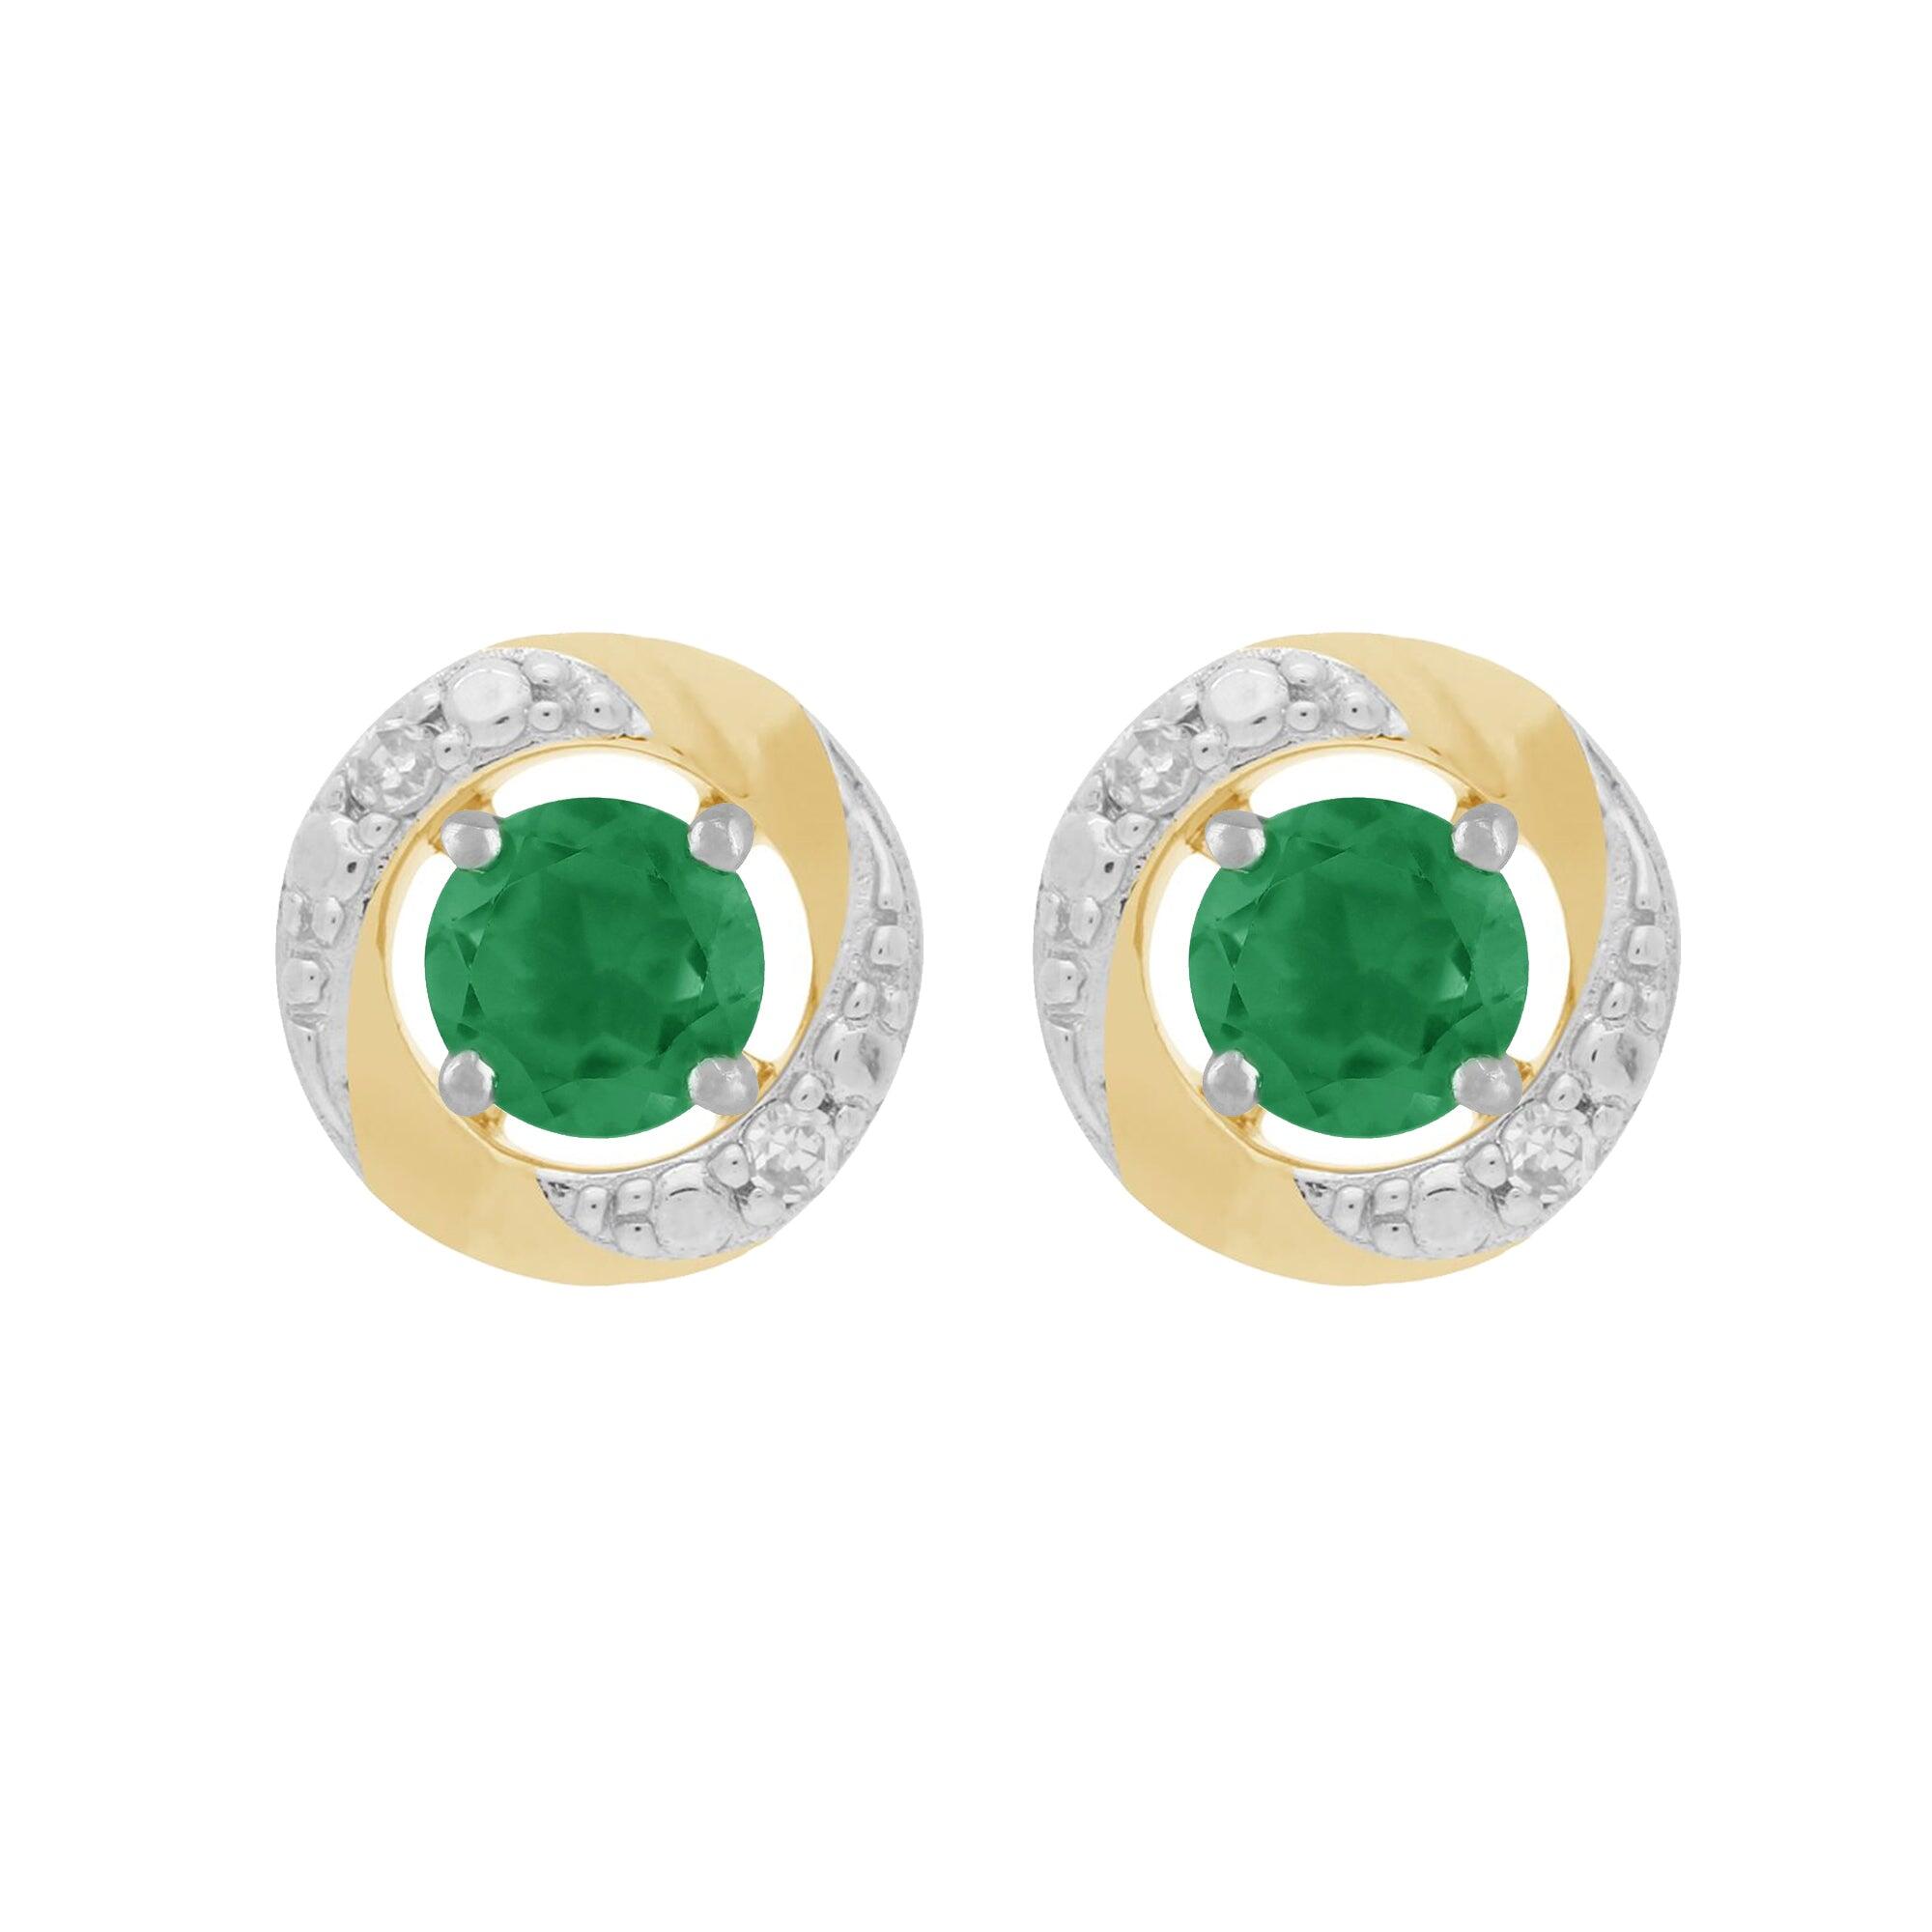 9ct White Gold Emerald Stud Earrings with Detachable Diamond Halo Ear Jacket in 9ct Yellow Gold